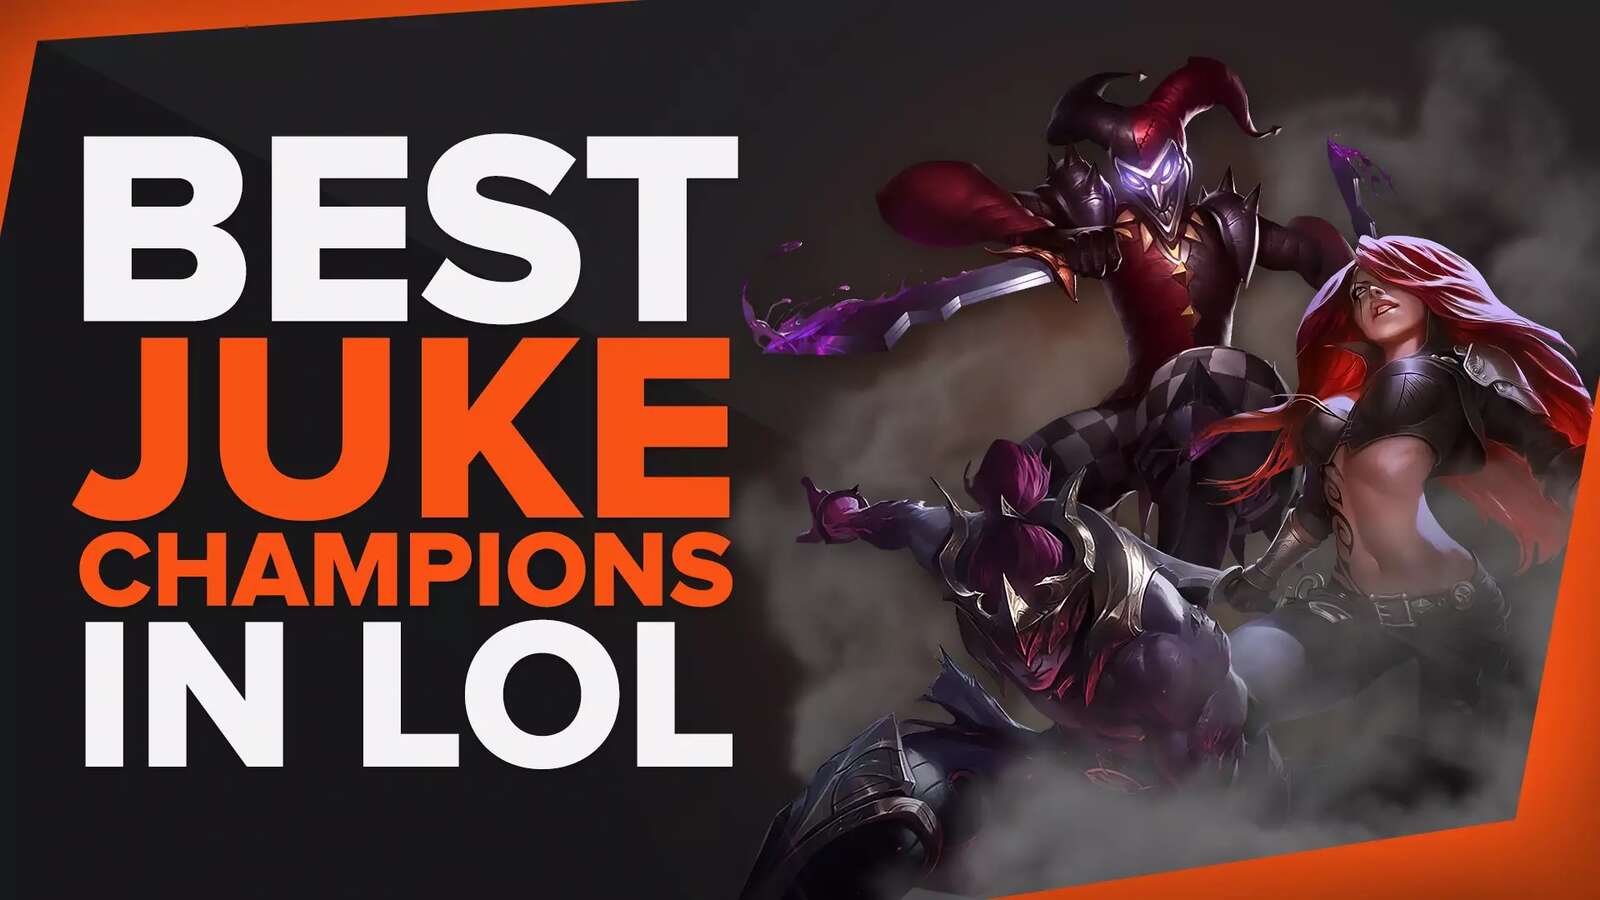 10 Best LoL Champions for Juking Enemies